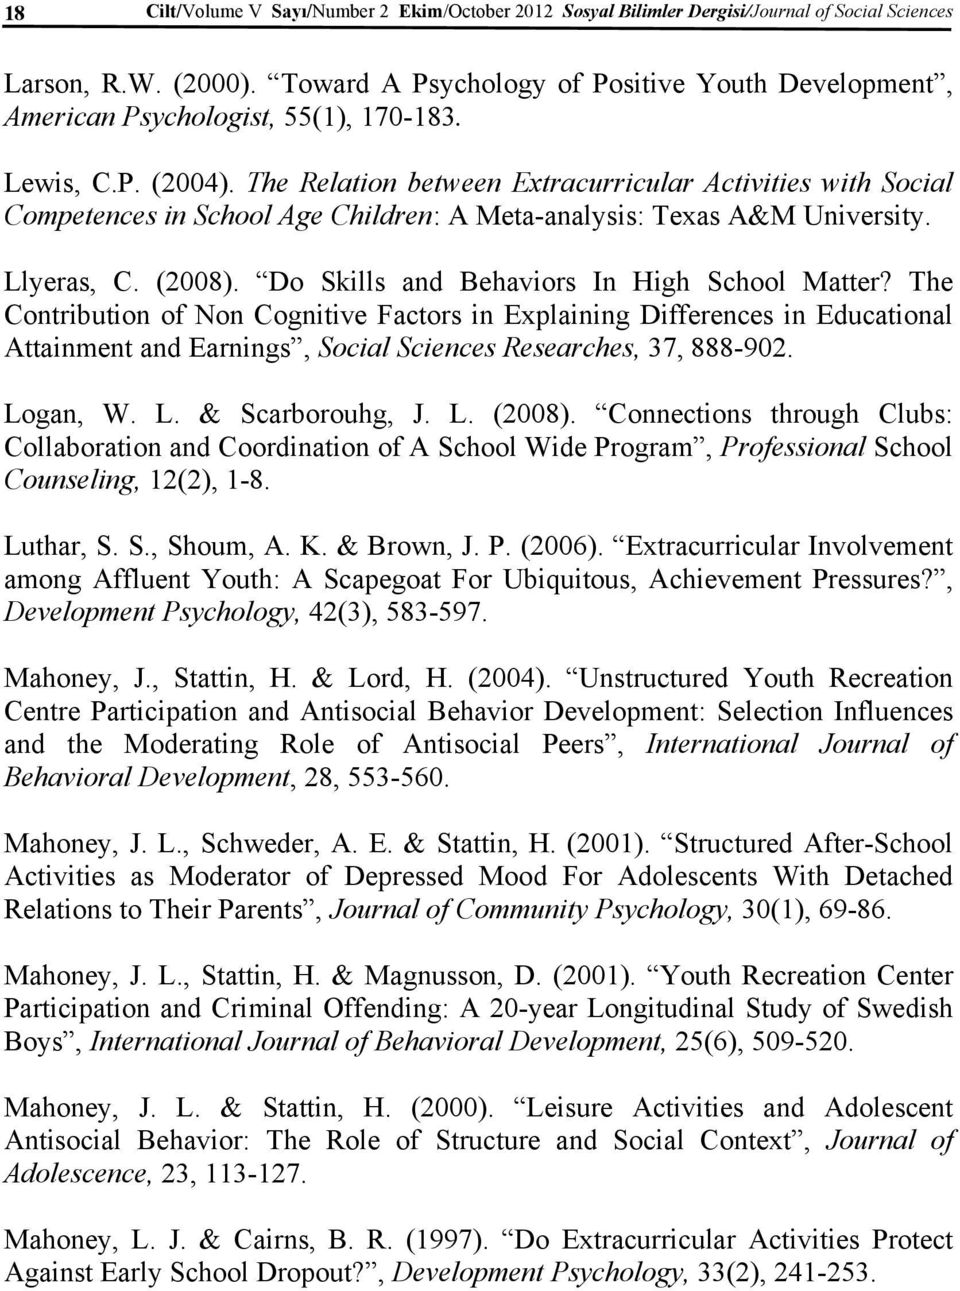 The Relation between Extracurricular Activities with Social Competences in School Age Children: A Meta-analysis: Texas A&M University. Llyeras, C. (2008).